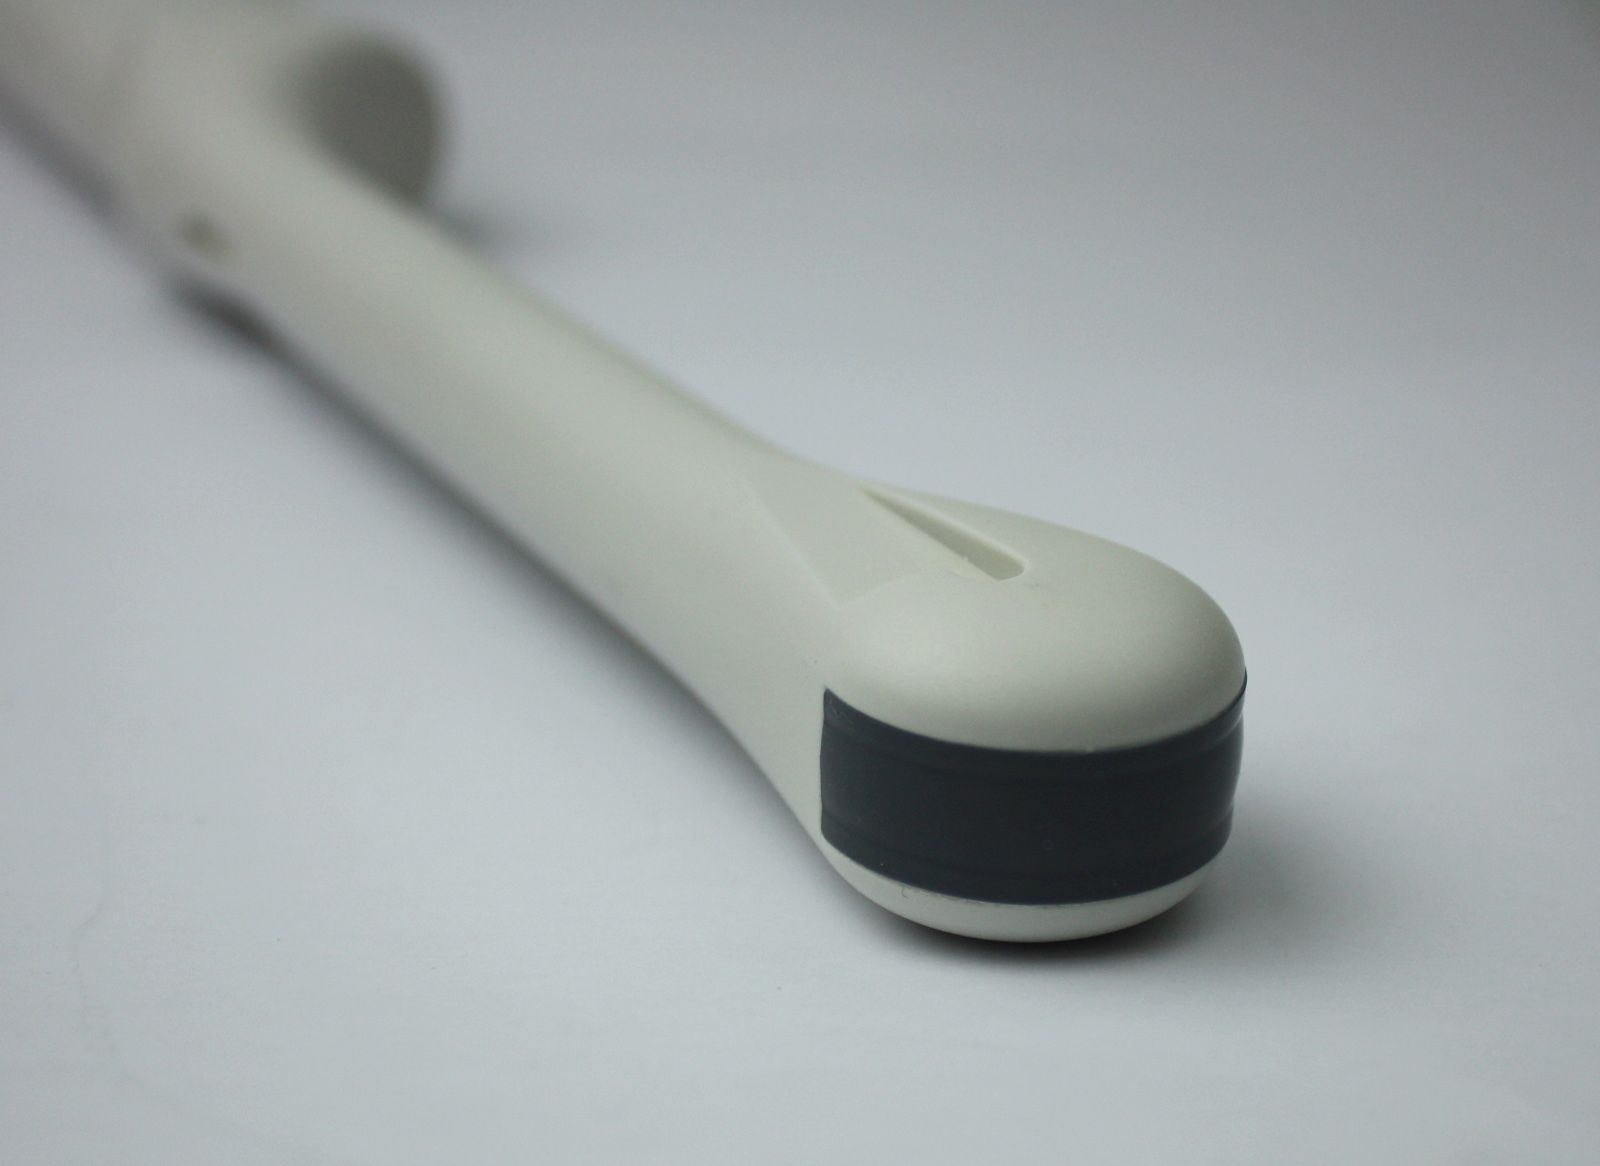 6V4, 4-9MHz, Transvaginal Micro-curved Array Probe for SonoScape A6 Ultrasound DIAGNOSTIC ULTRASOUND MACHINES FOR SALE